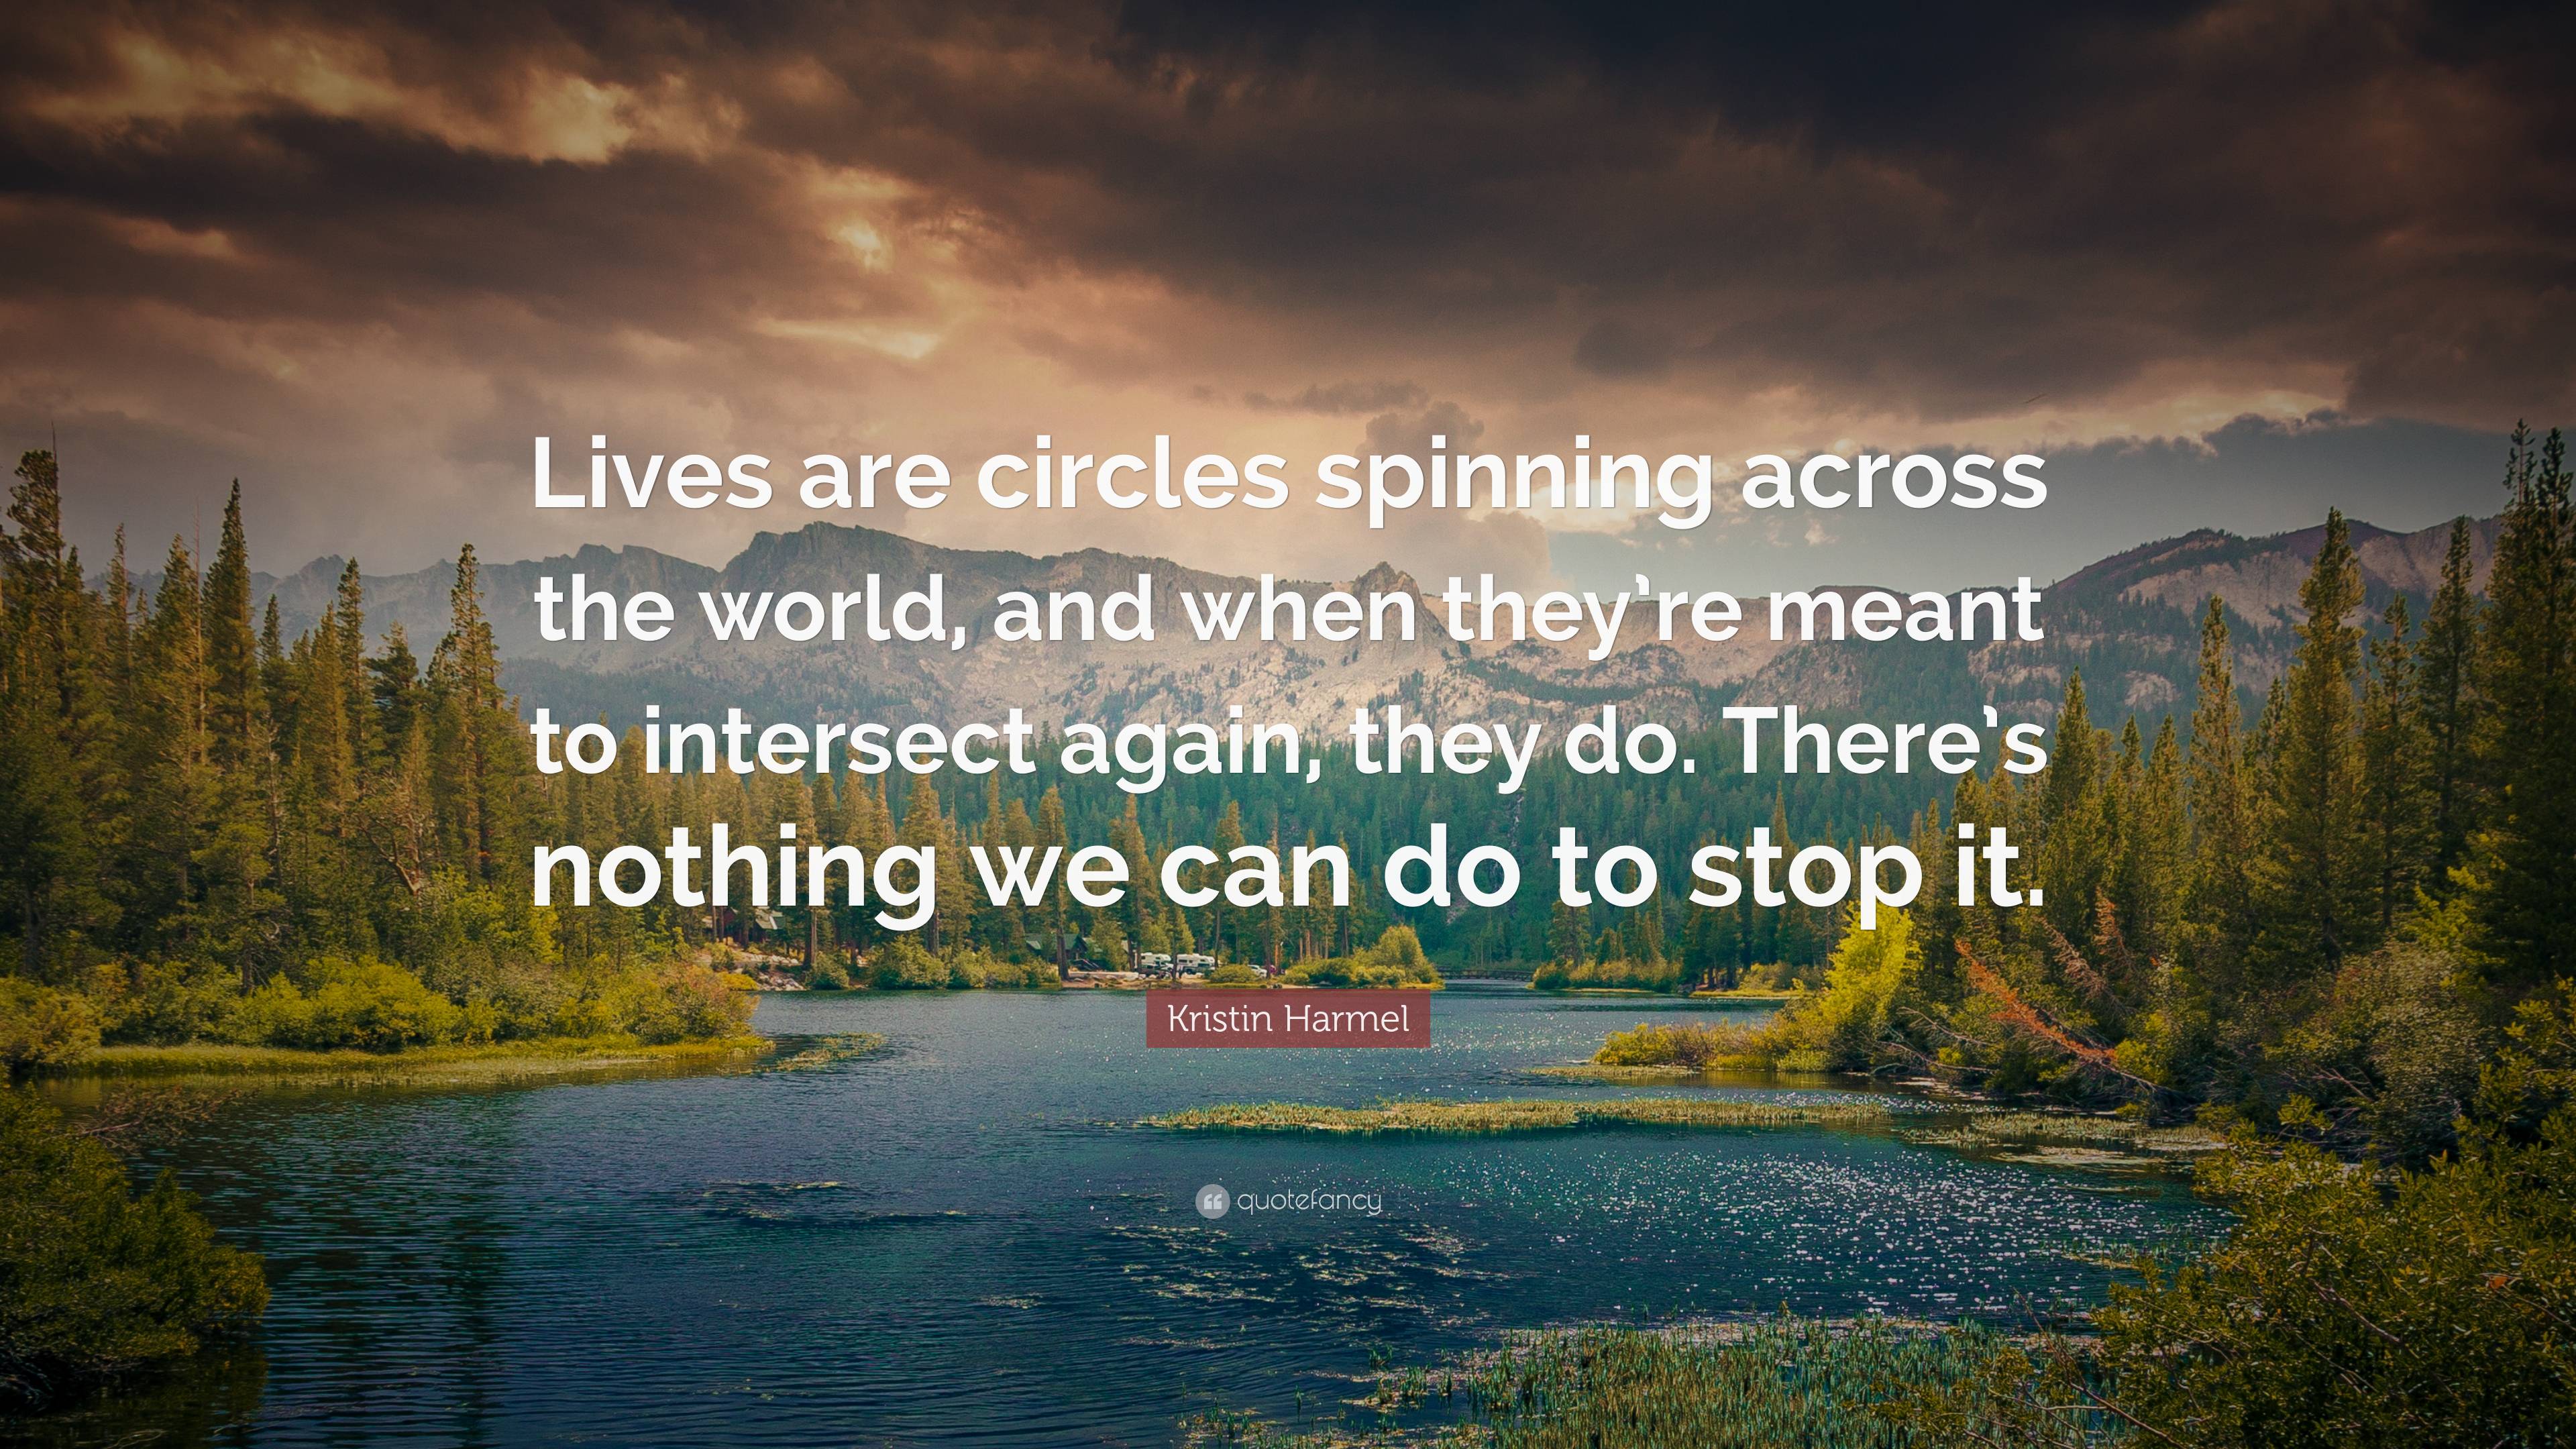 Kristin Harmel Quote: “Lives are circles spinning across the world, and  when they're meant to intersect again, they do. There's nothing we can ”